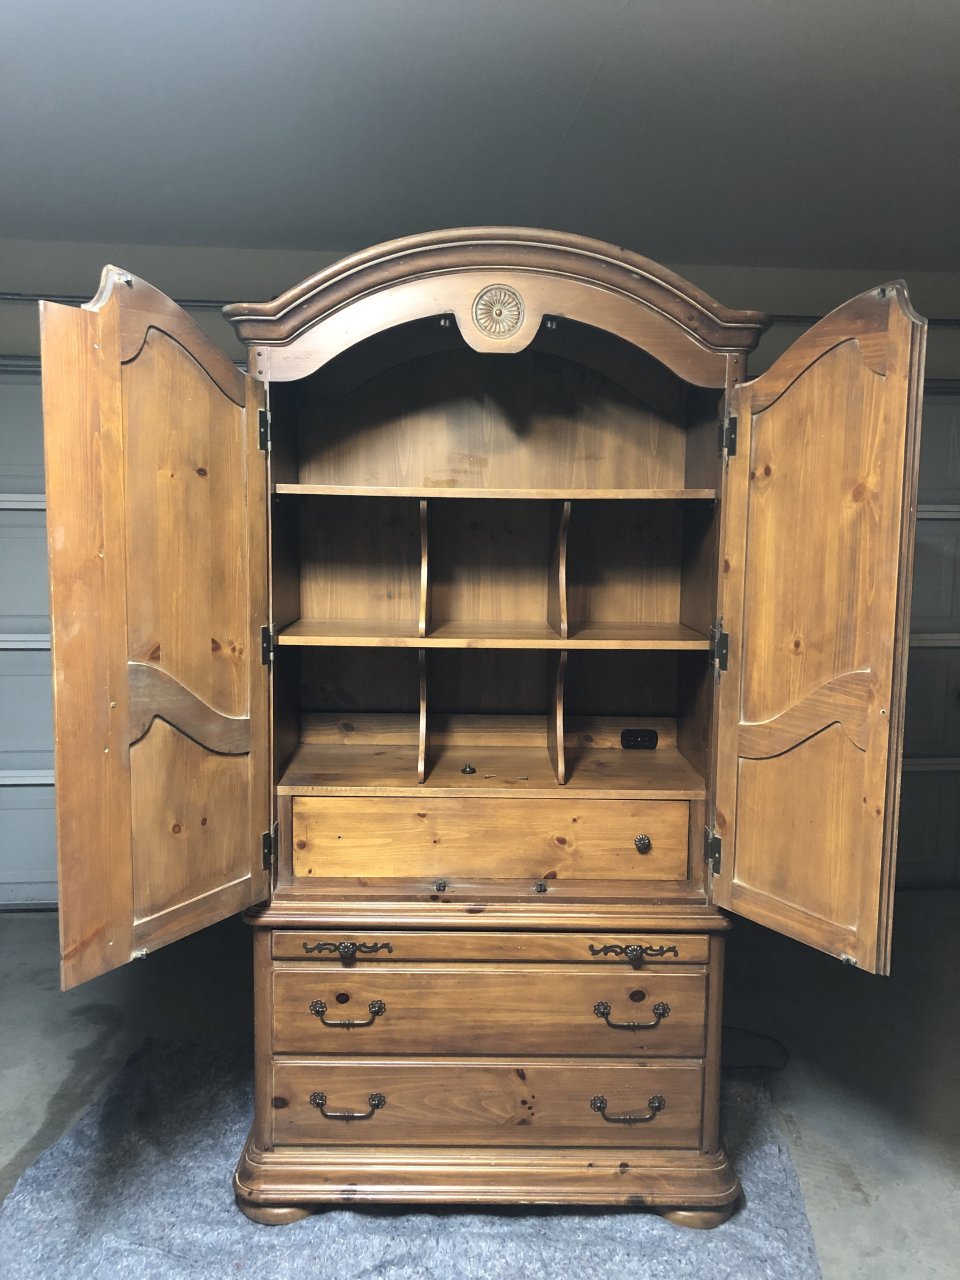 Help ID A Mt Airy Large Wooden Cabinet | My Antique Furniture Collection